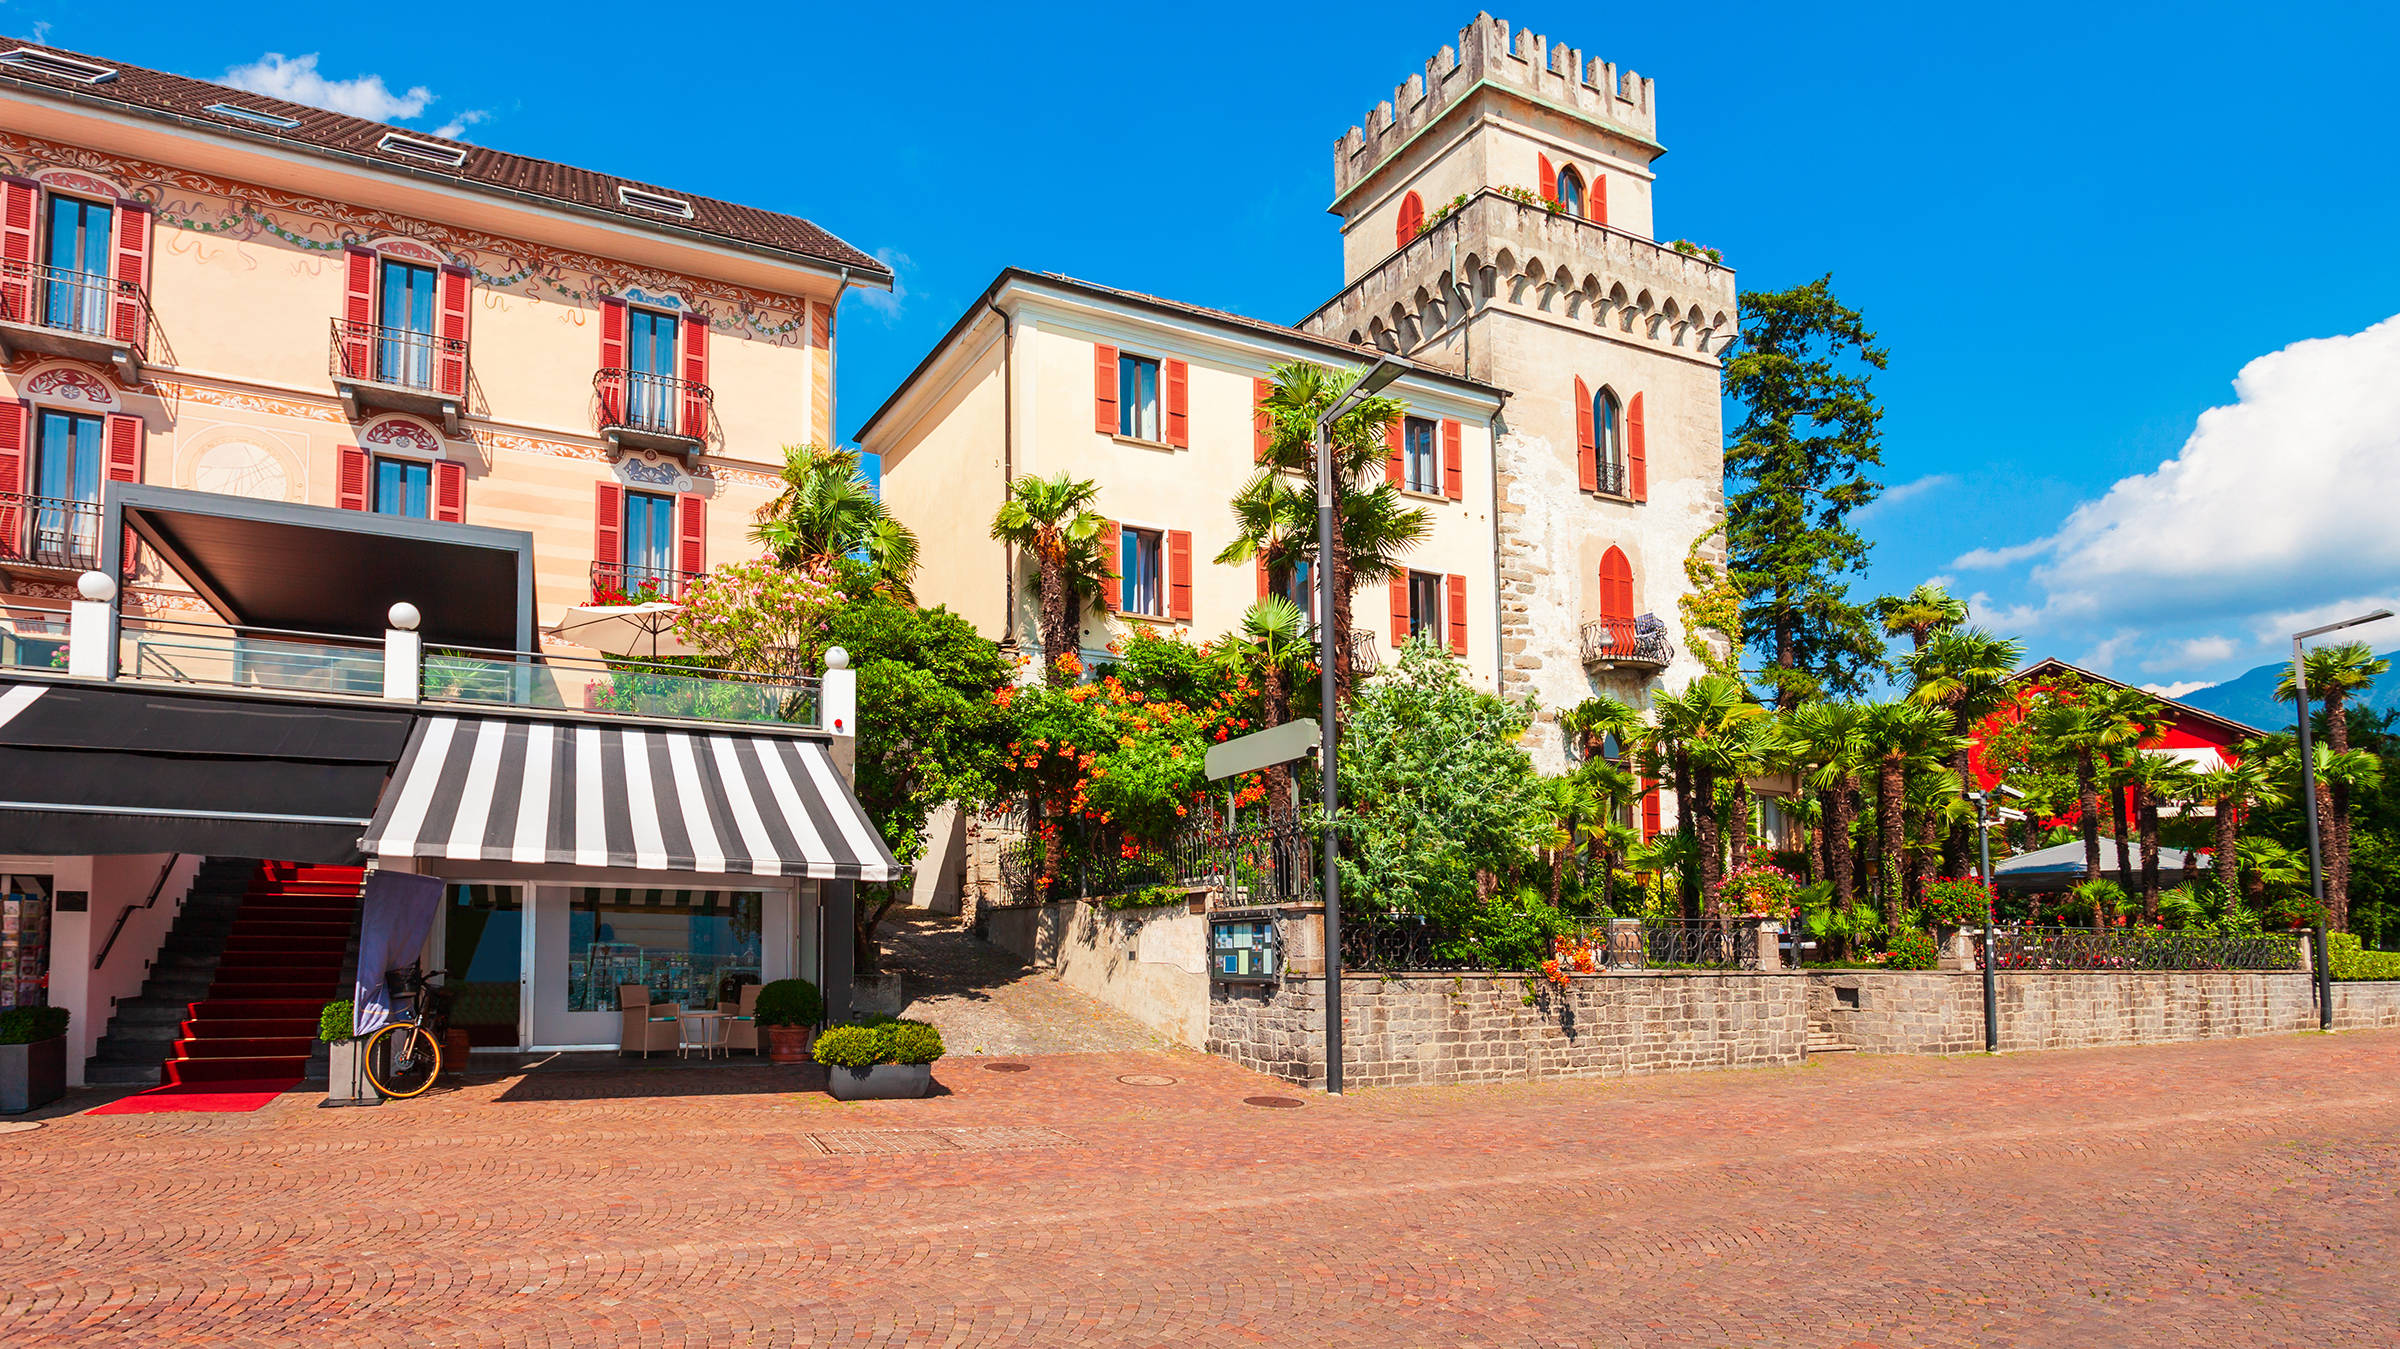 Shopping in Locarno | H-Hotels.com